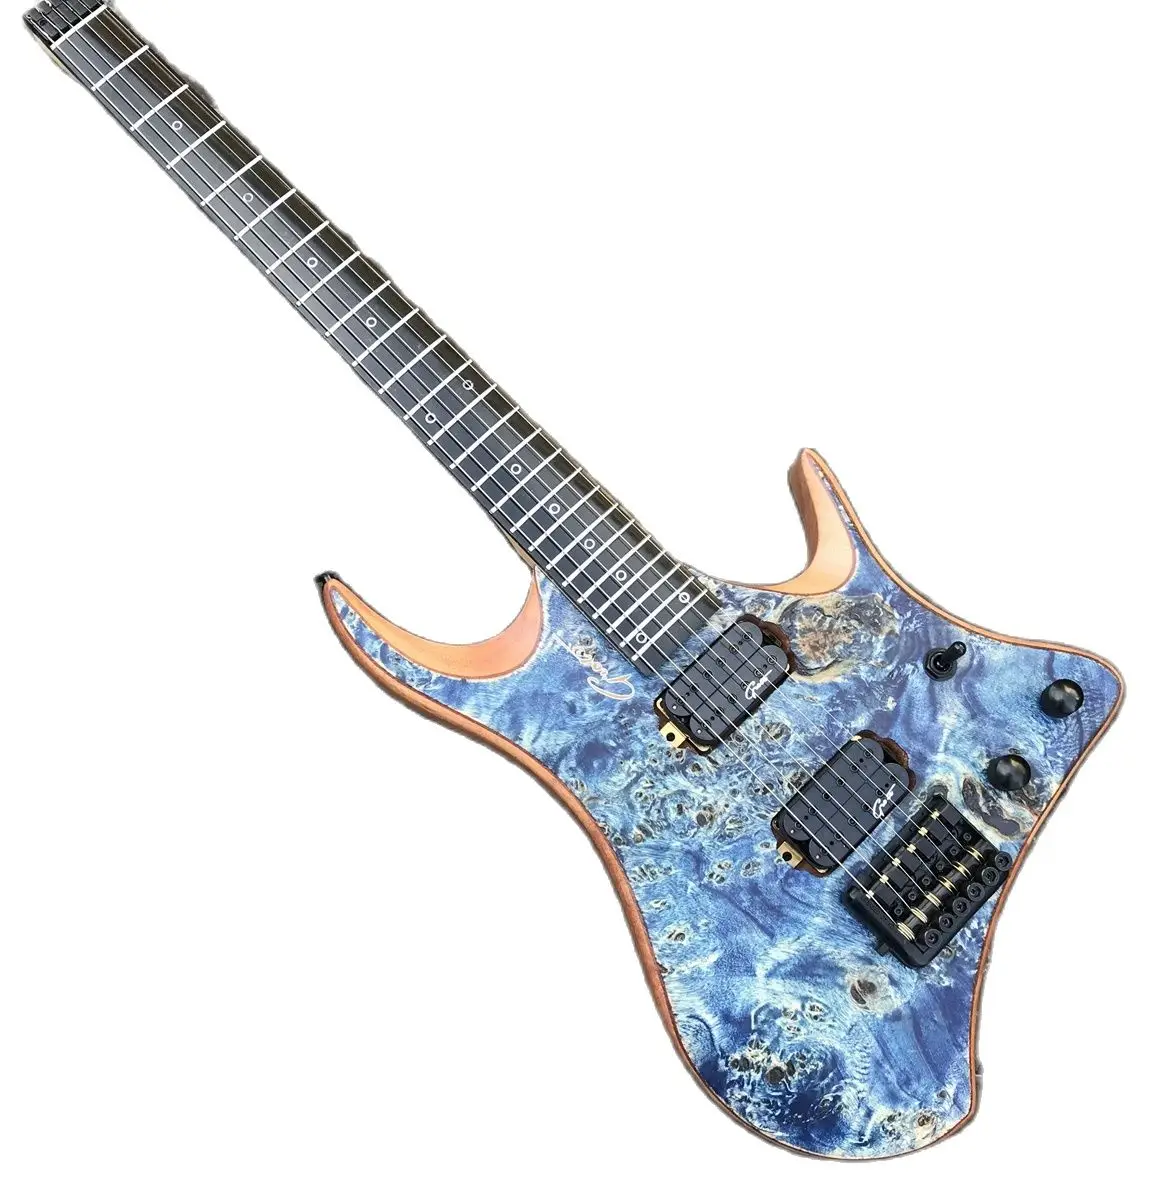 

Quilt Maple Headless Electric Guitar Colourful Paint Body Ebony Fretboard 24 Frets Imported Black Hardware with Gigbag Free